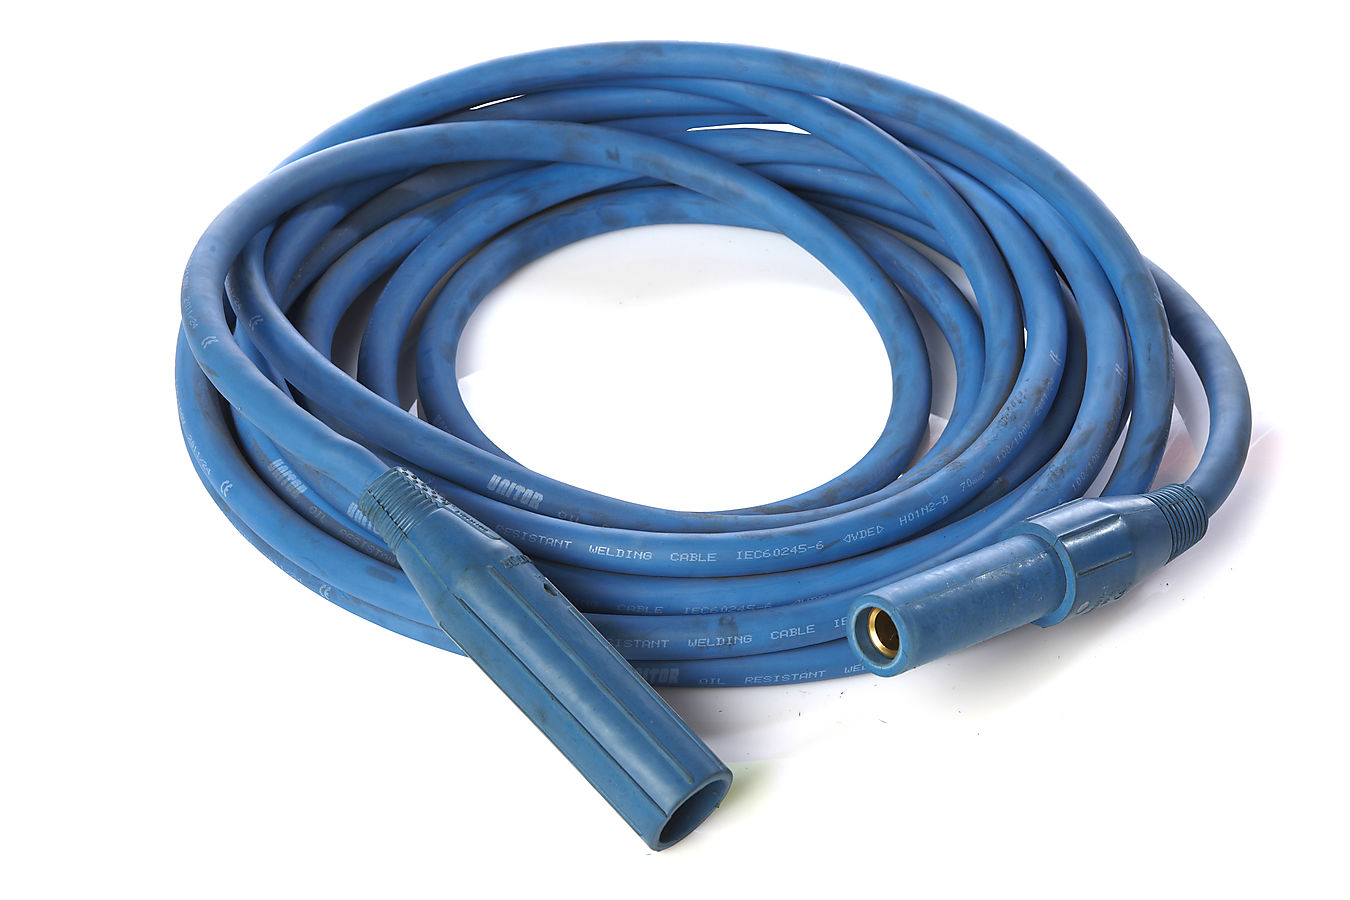 50mm WELDING CABLE AND CONNECTOR SUPPLIER IN ABU DHABI UAE rigstore.ae